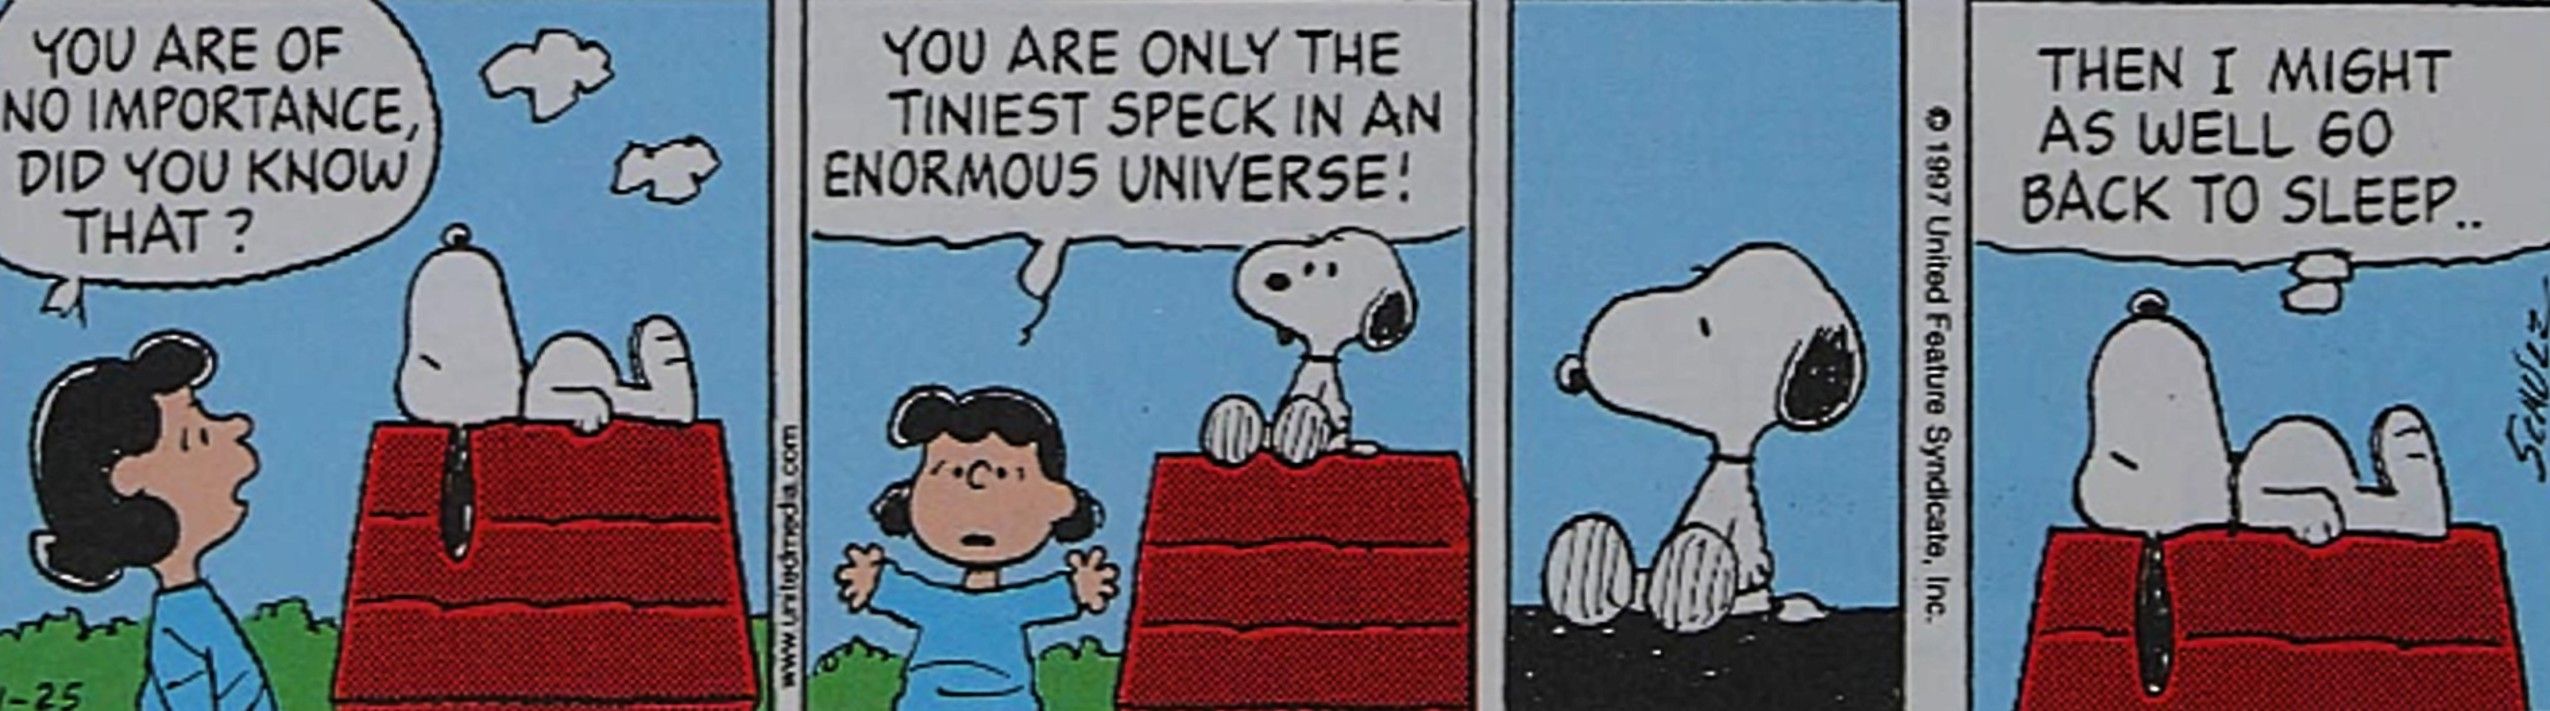 Peanuts, Lucy tells an indifferent Snoopy he's a tiny, insignificant speck amongst the cosmos